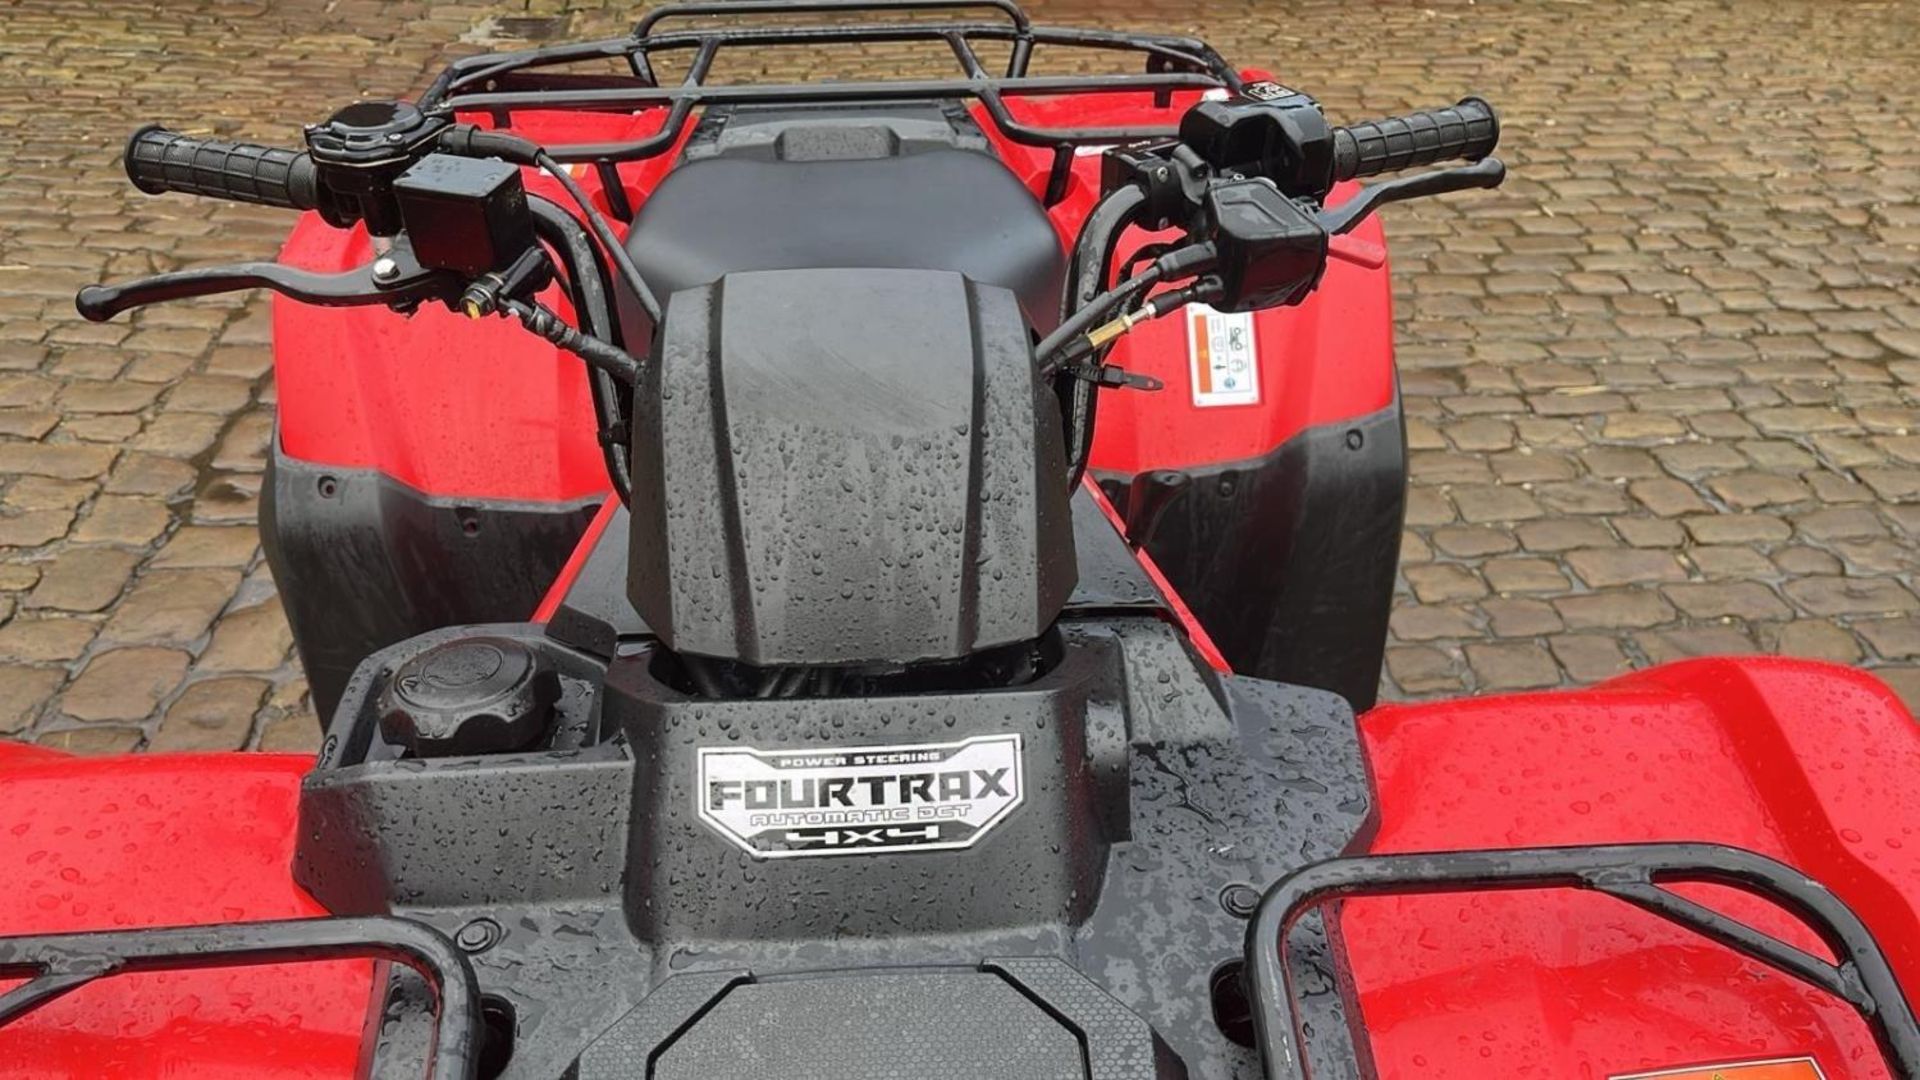 2018 HONDA TRX420FA6 FOURTRAX RANCHER AUTOMATIC DCT QUAD BIKE CAN BE SWITCED FROM 2 TO 4 WHEEL DRIVE - Image 3 of 21